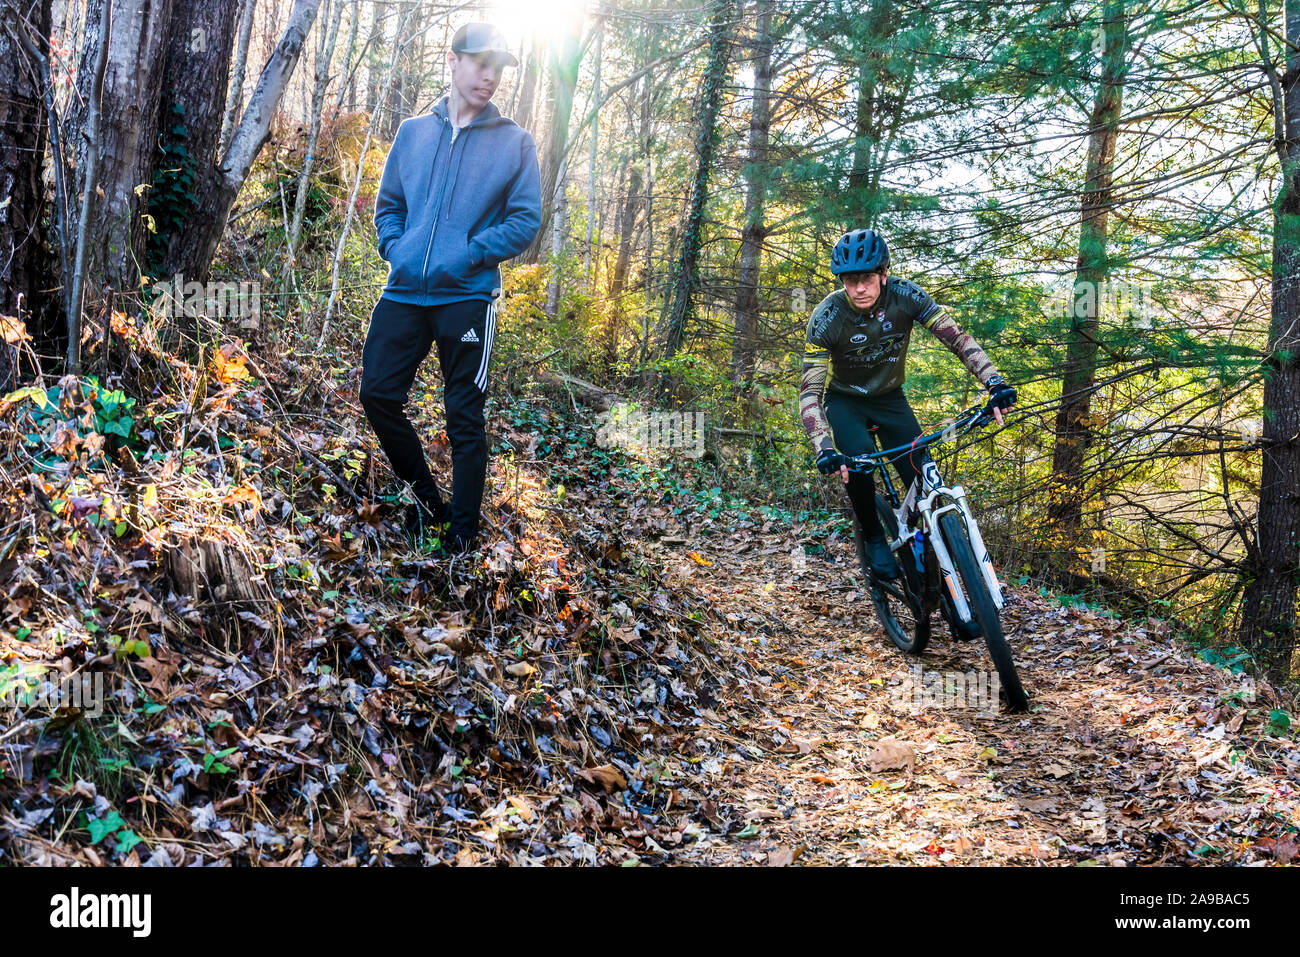 Mountain biker and a walker or runner must share this trail. Stock Photo